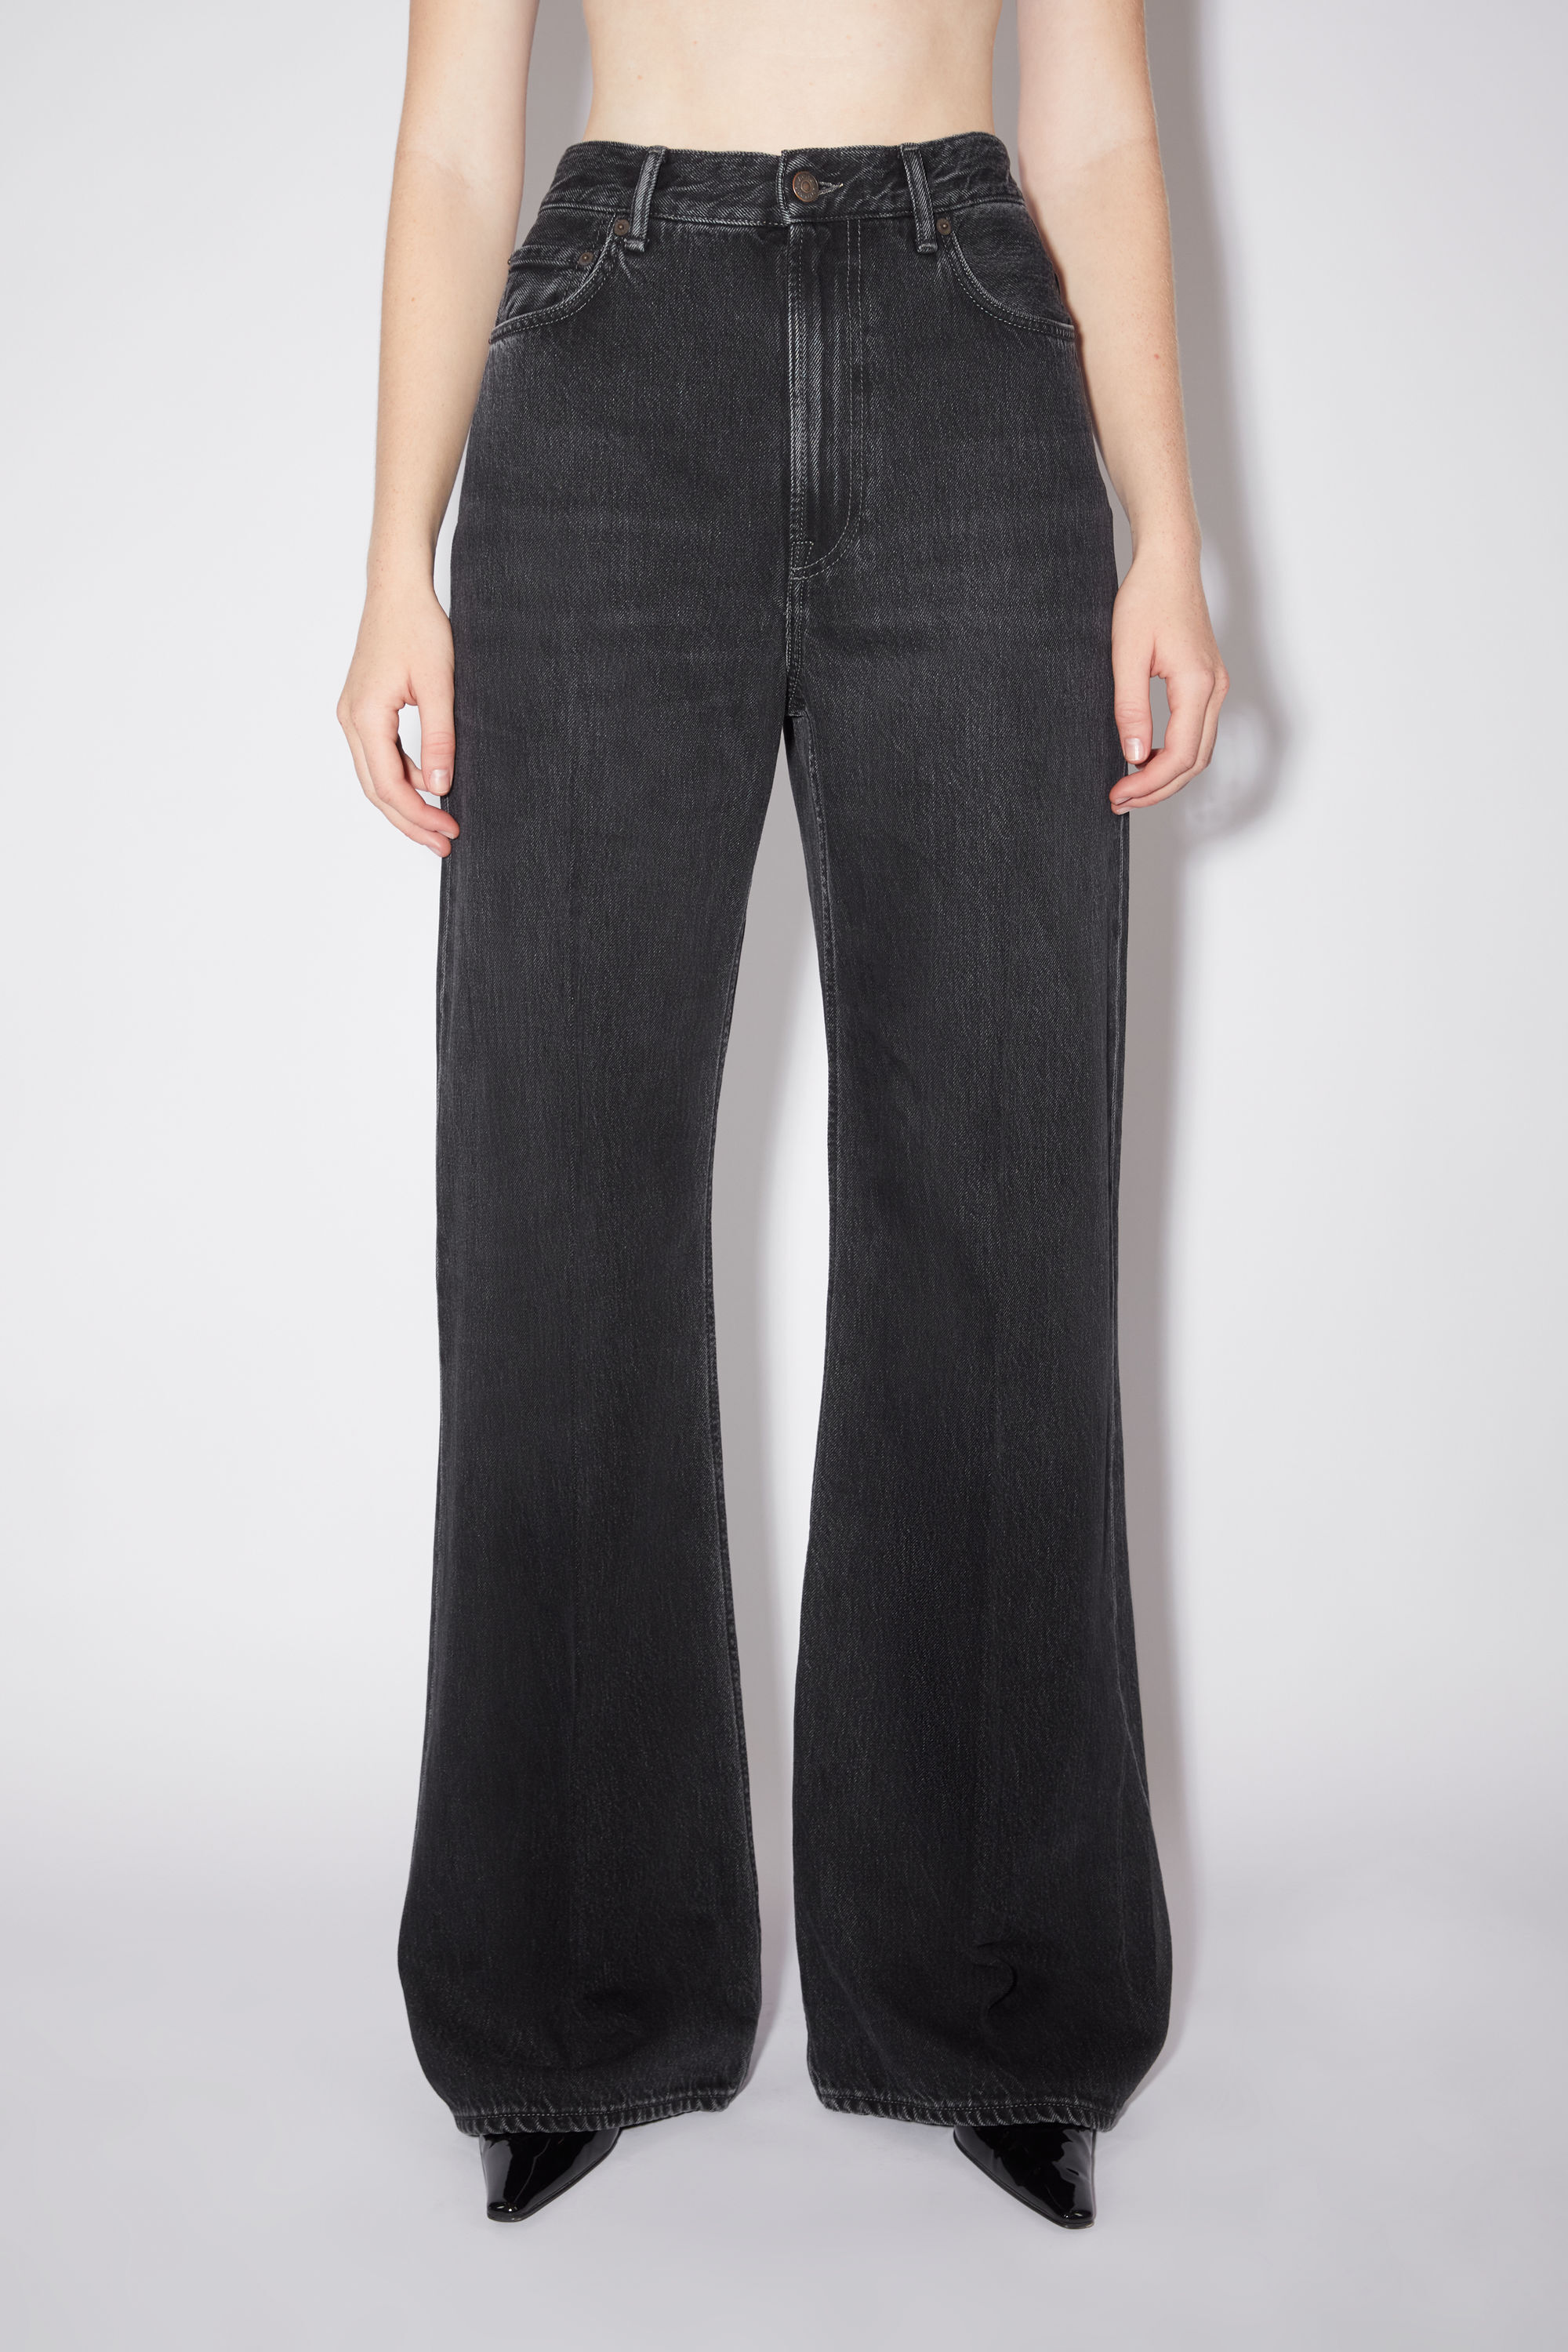 Acne Studios - Relaxed fit jeans - 2022 - Black